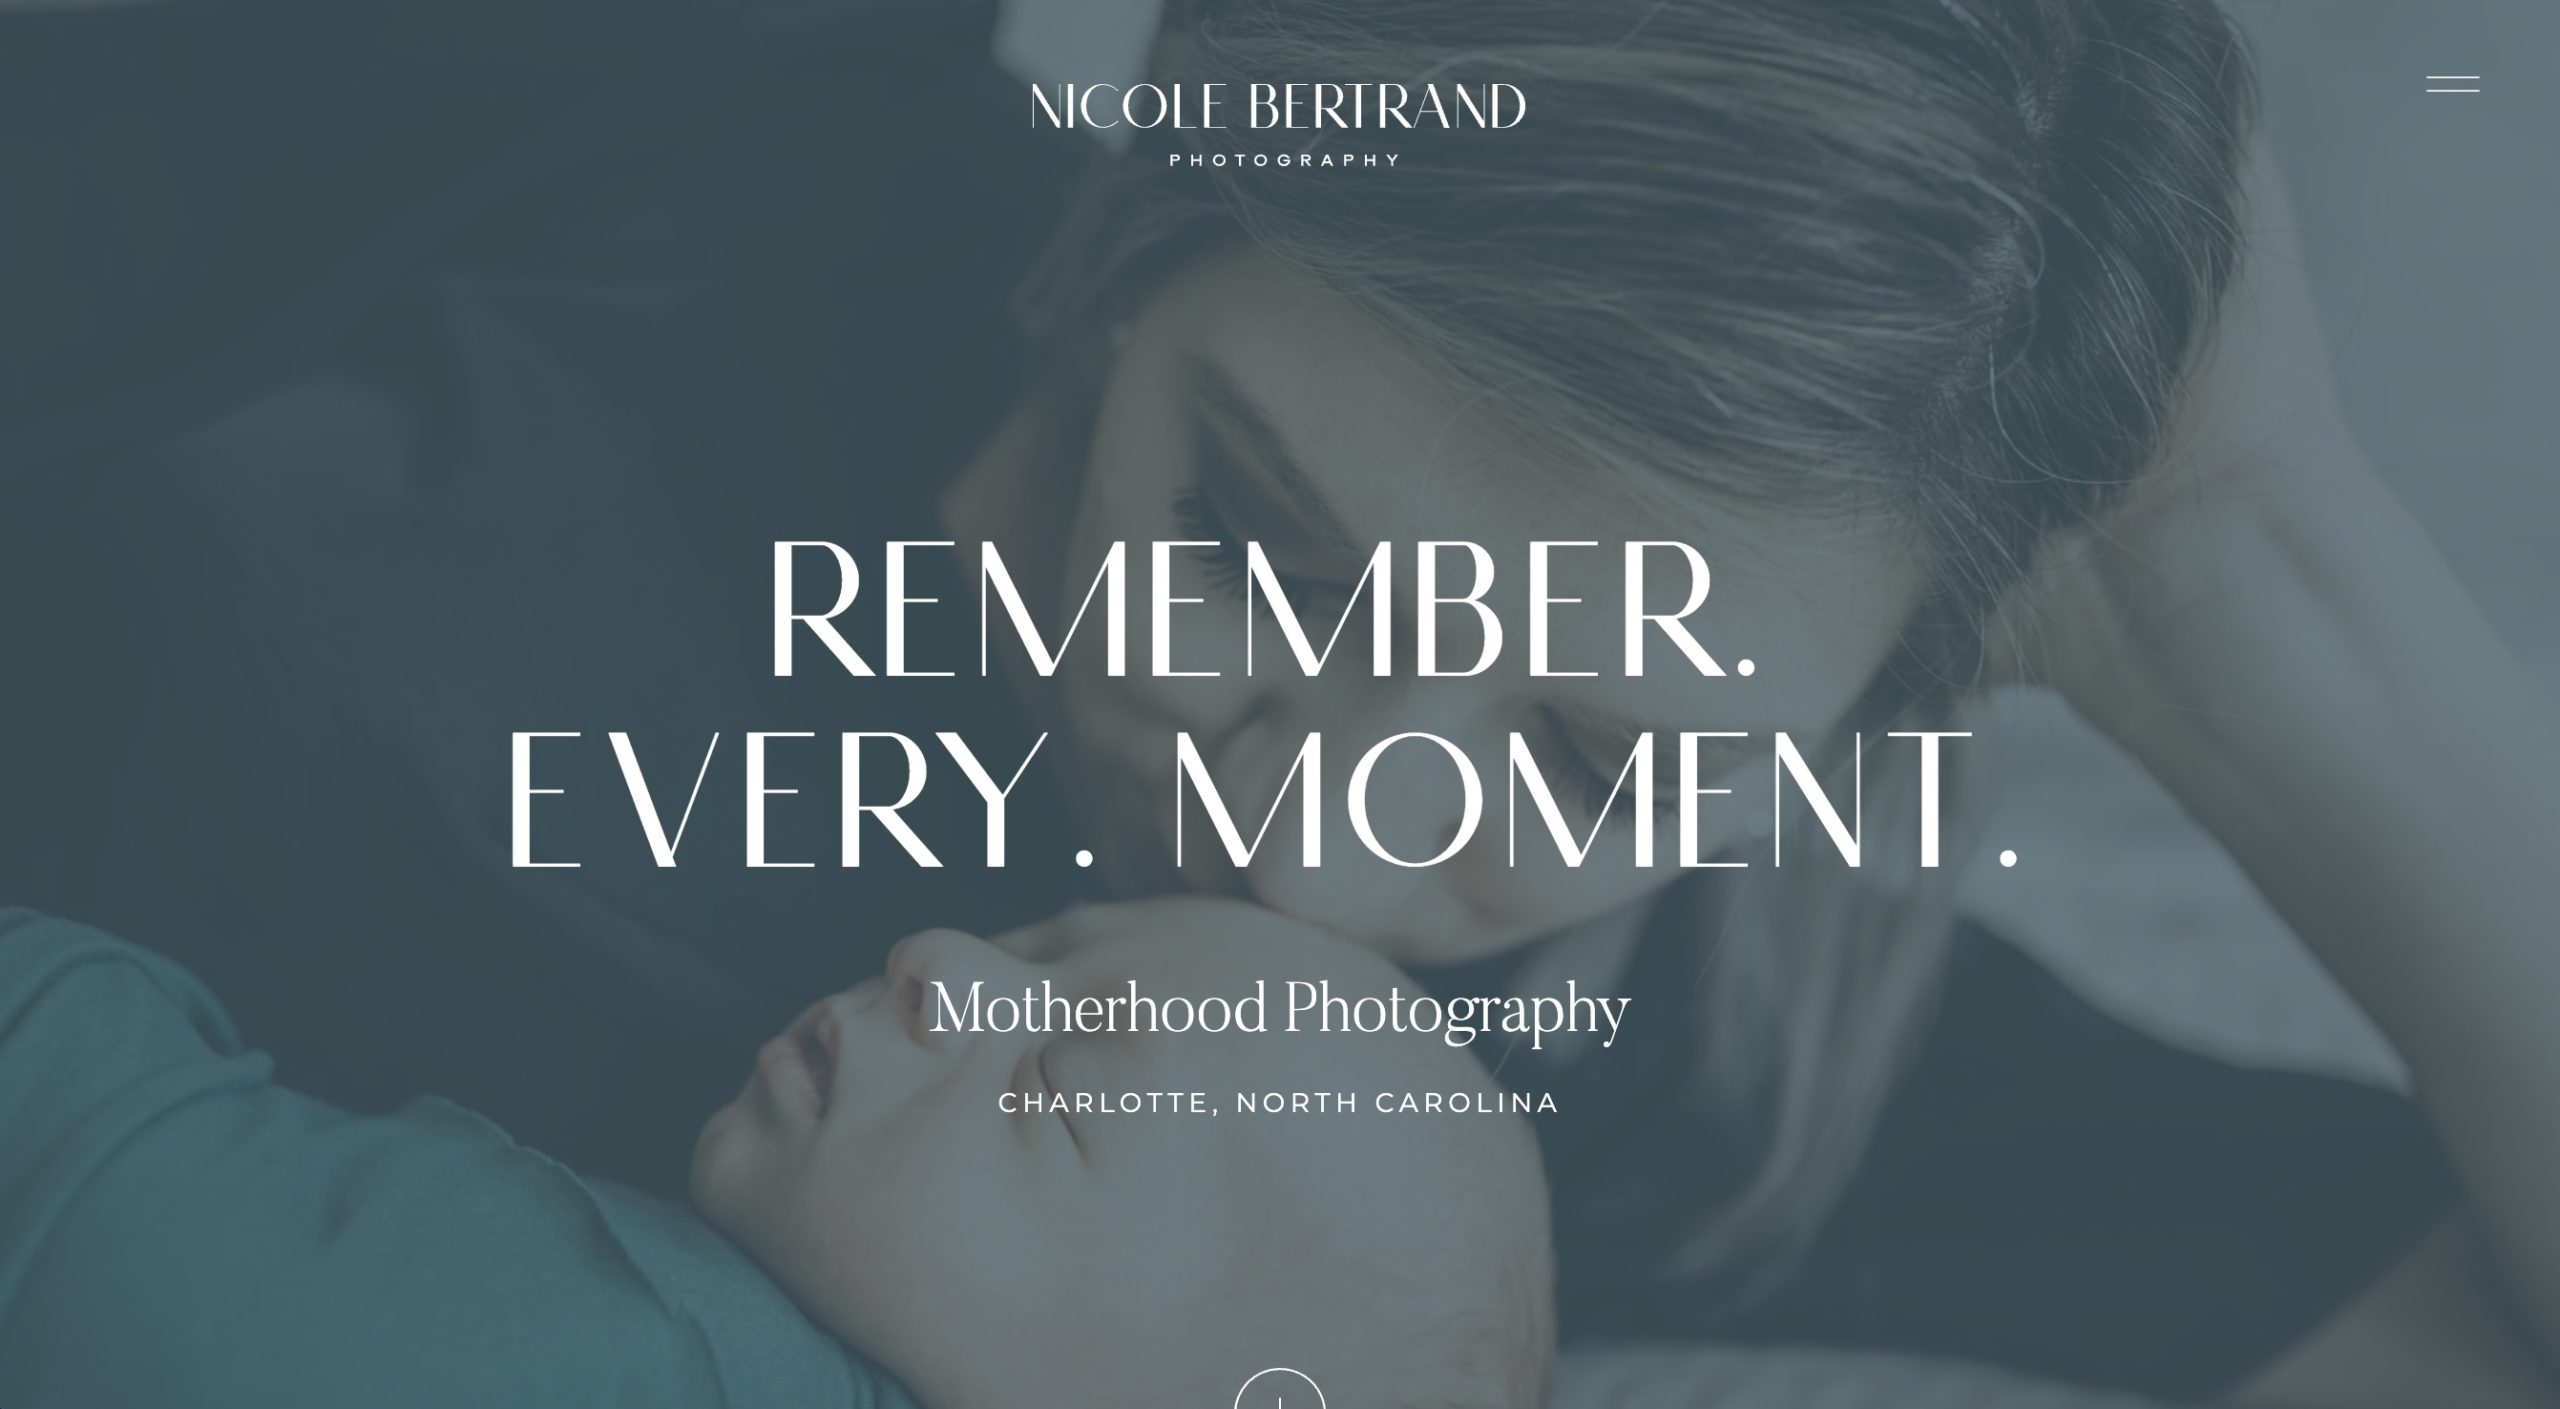 homepage for nicole bertrand photography website